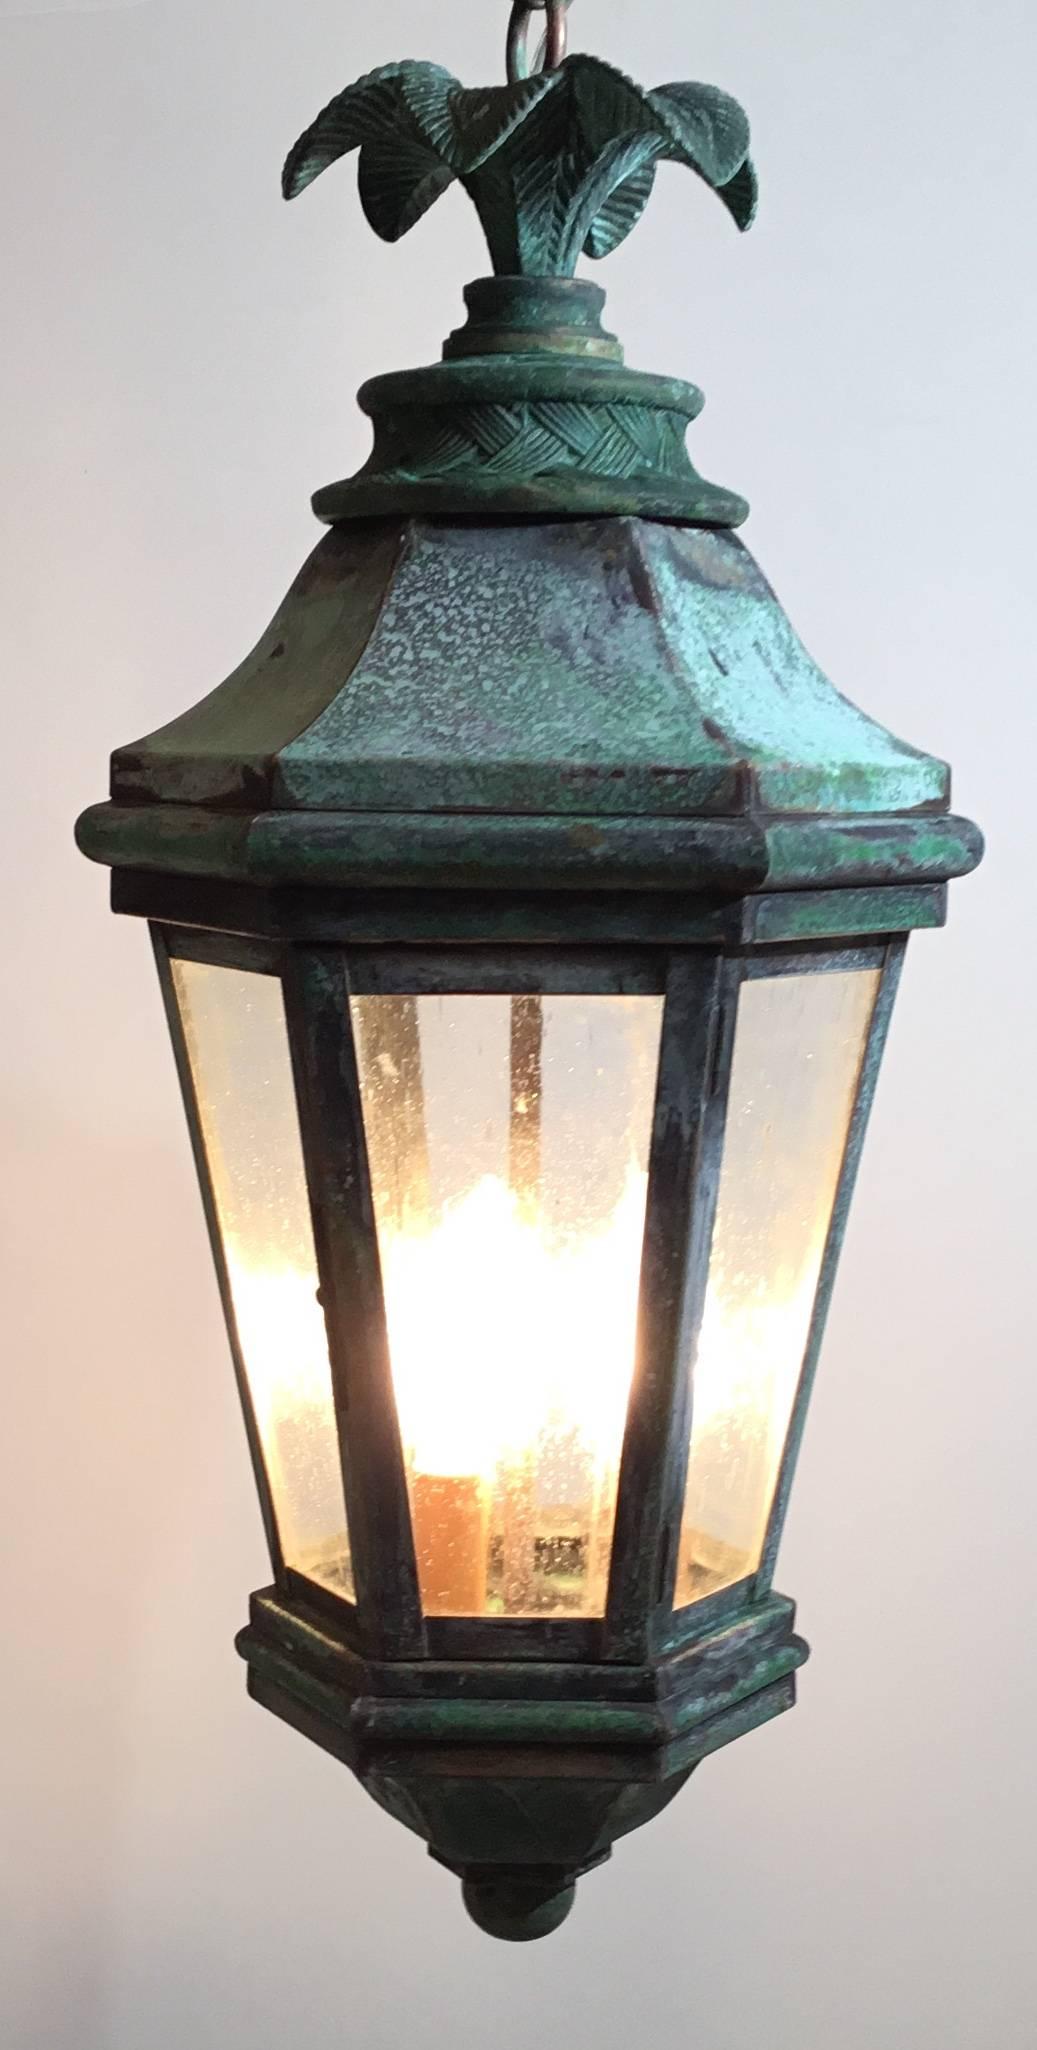 Funky  lantern made of hand crafted solid brass ,bronze top with decorative palm leaf motif ,weathered  patina ,electrified with three 40/watt lights,good for wet locations and would look great indoor as chandelier.seeded glass.